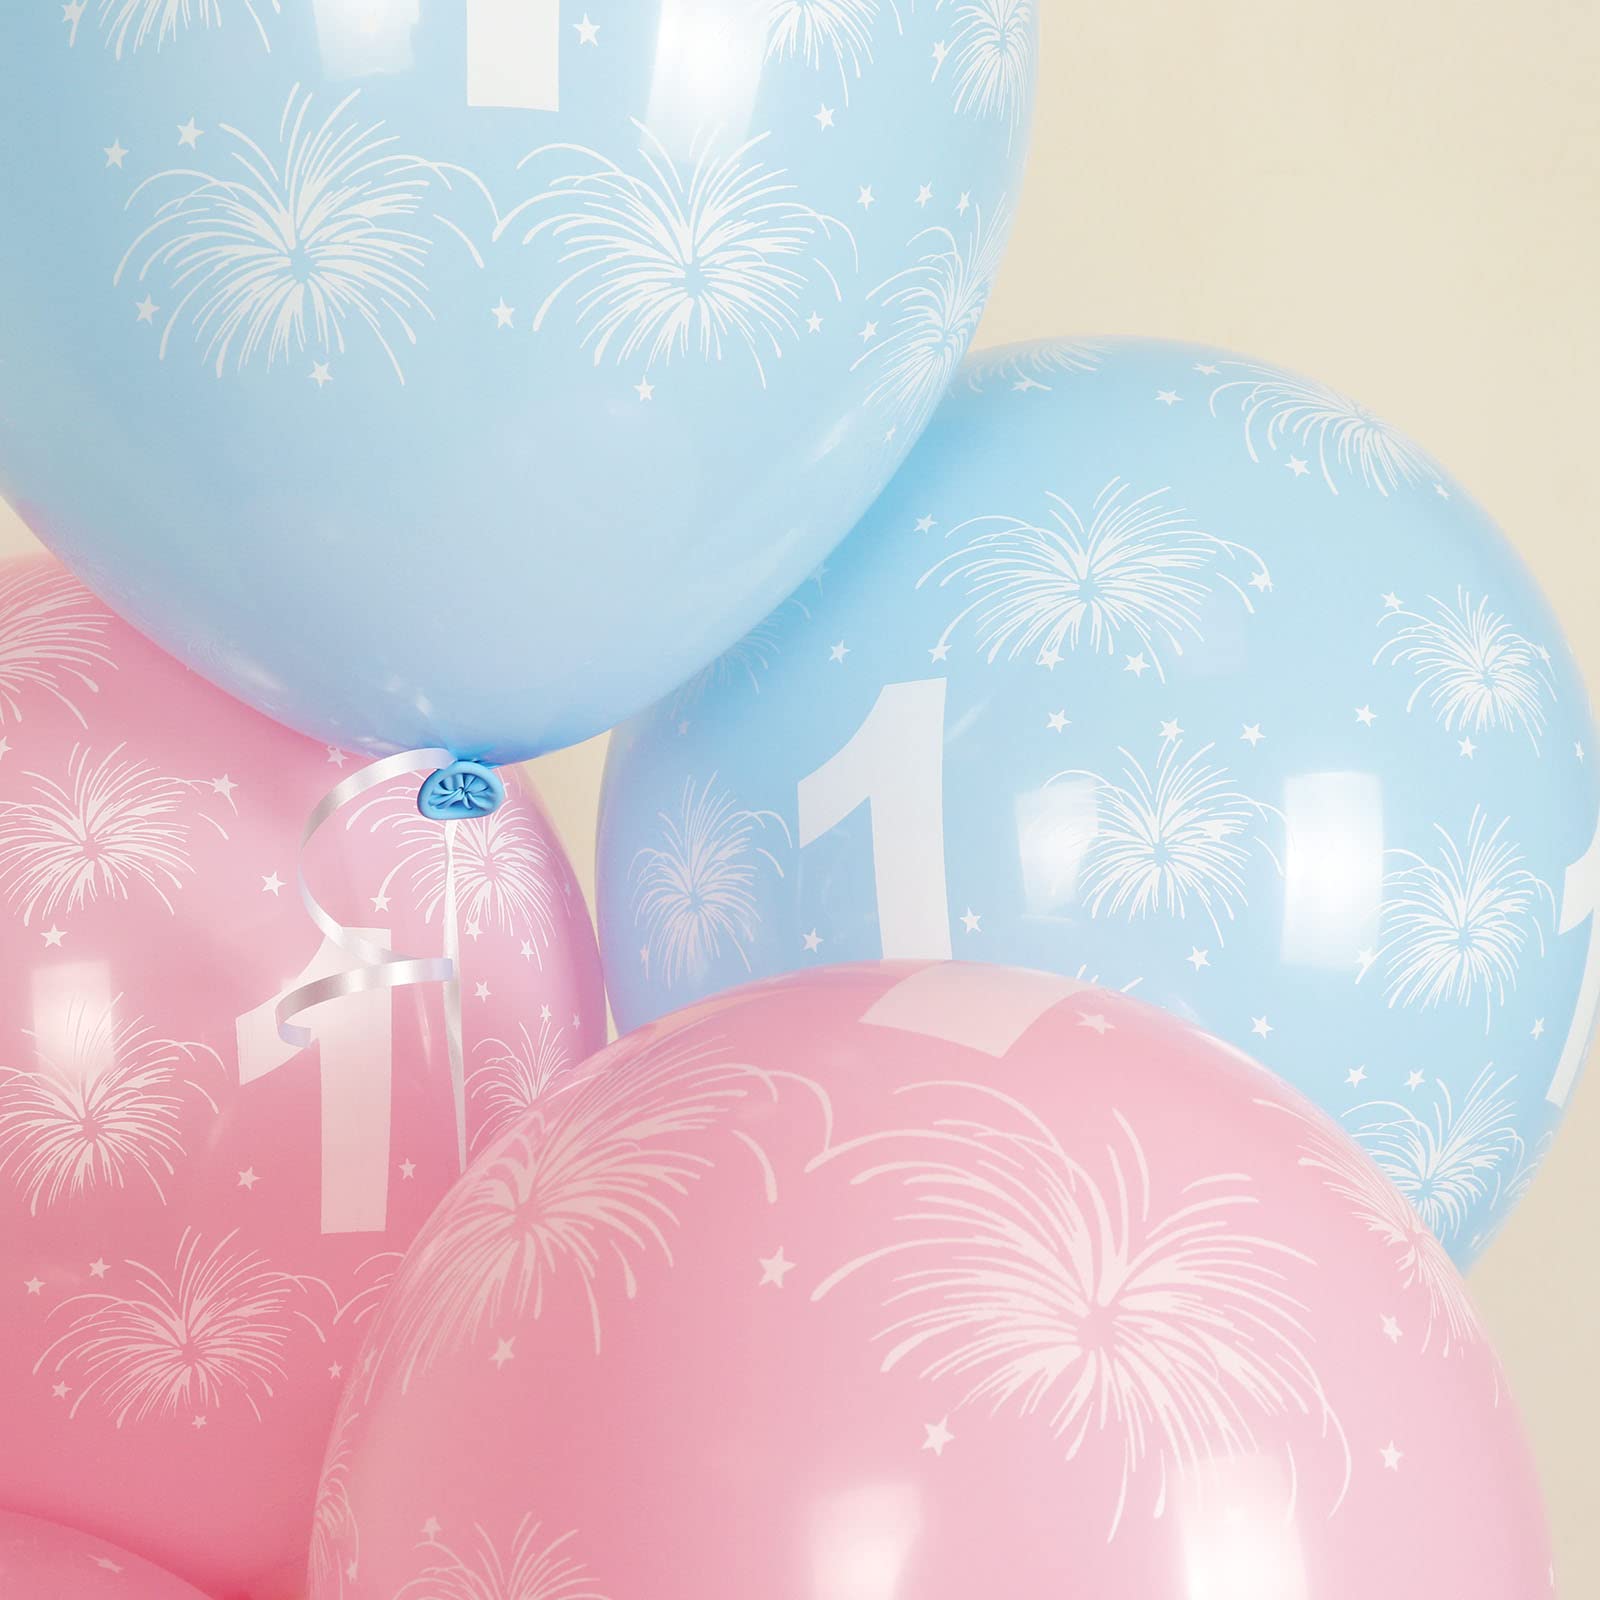 1st Birthday Balloons 12PCS, 12 inches Latex Assort Pastel Pink Baby Girl Numbers Birthday Balloon, Digit Balloons, Number 1 Age Balloons for 1 Year Old Birthday, 1st Anniversaries Party Decoration Supplies